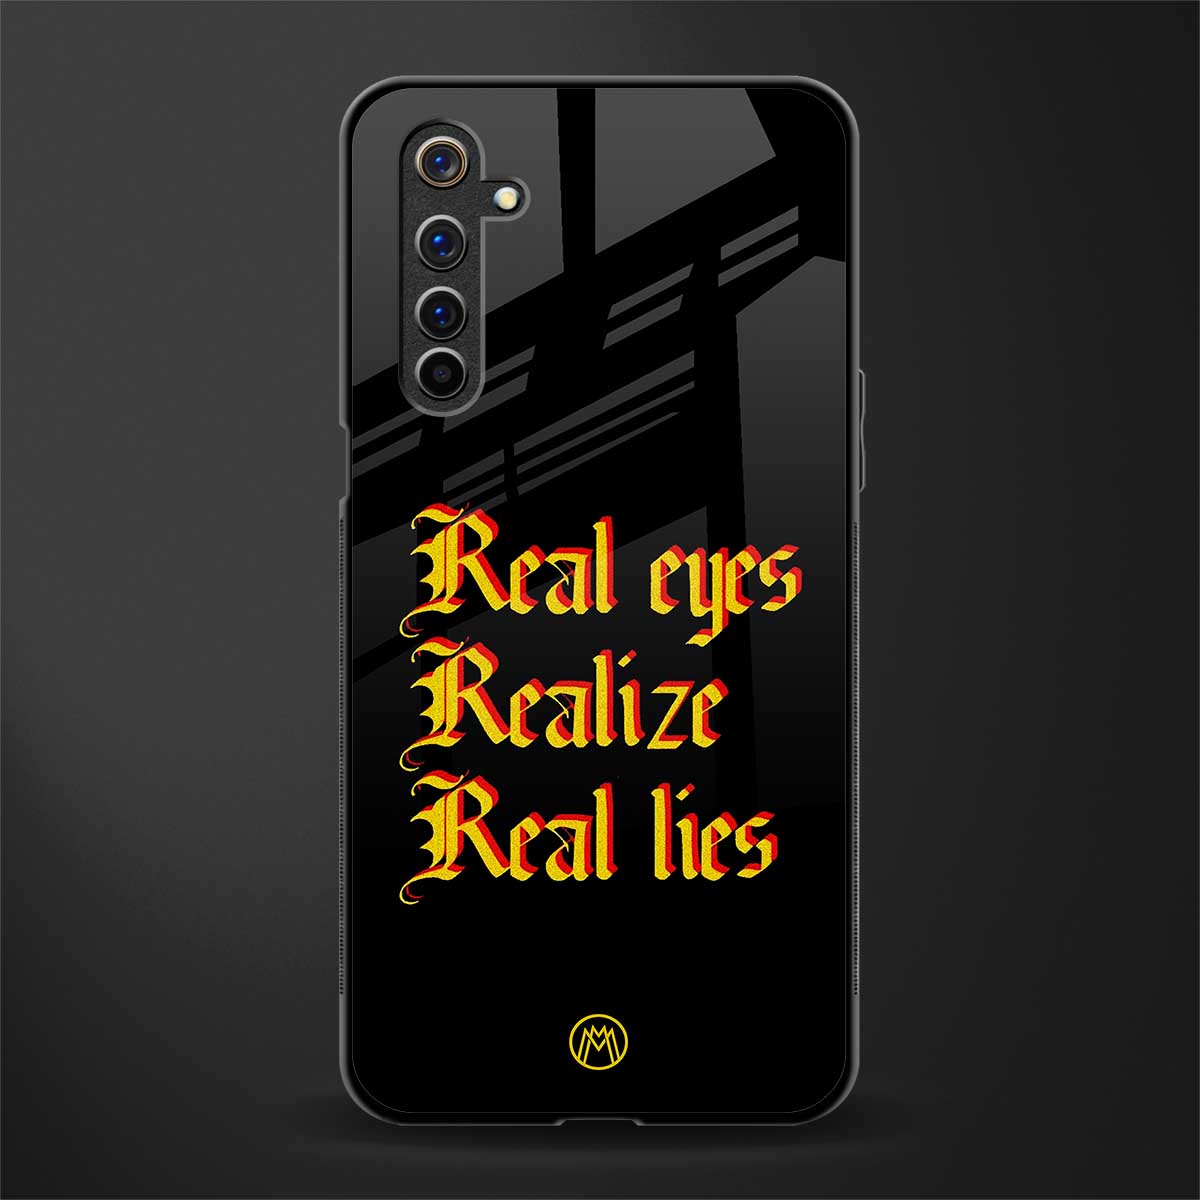 real eyes realize real lies quote glass case for realme 6 pro image